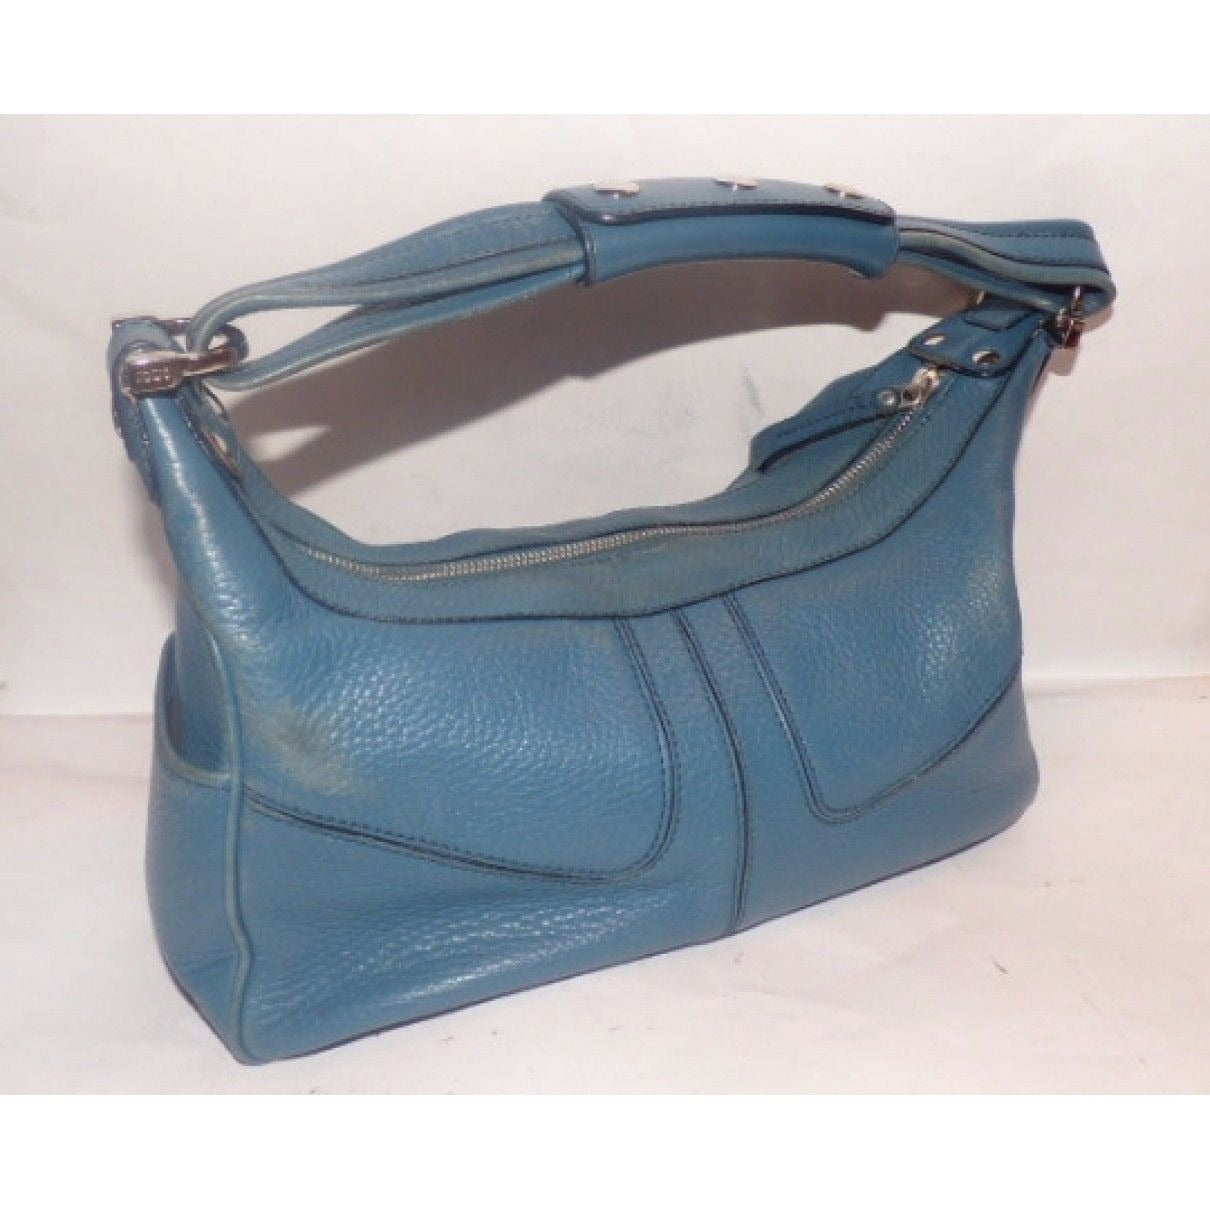 Tod's, robin's egg blue, grained leather, retro, top handle satchel